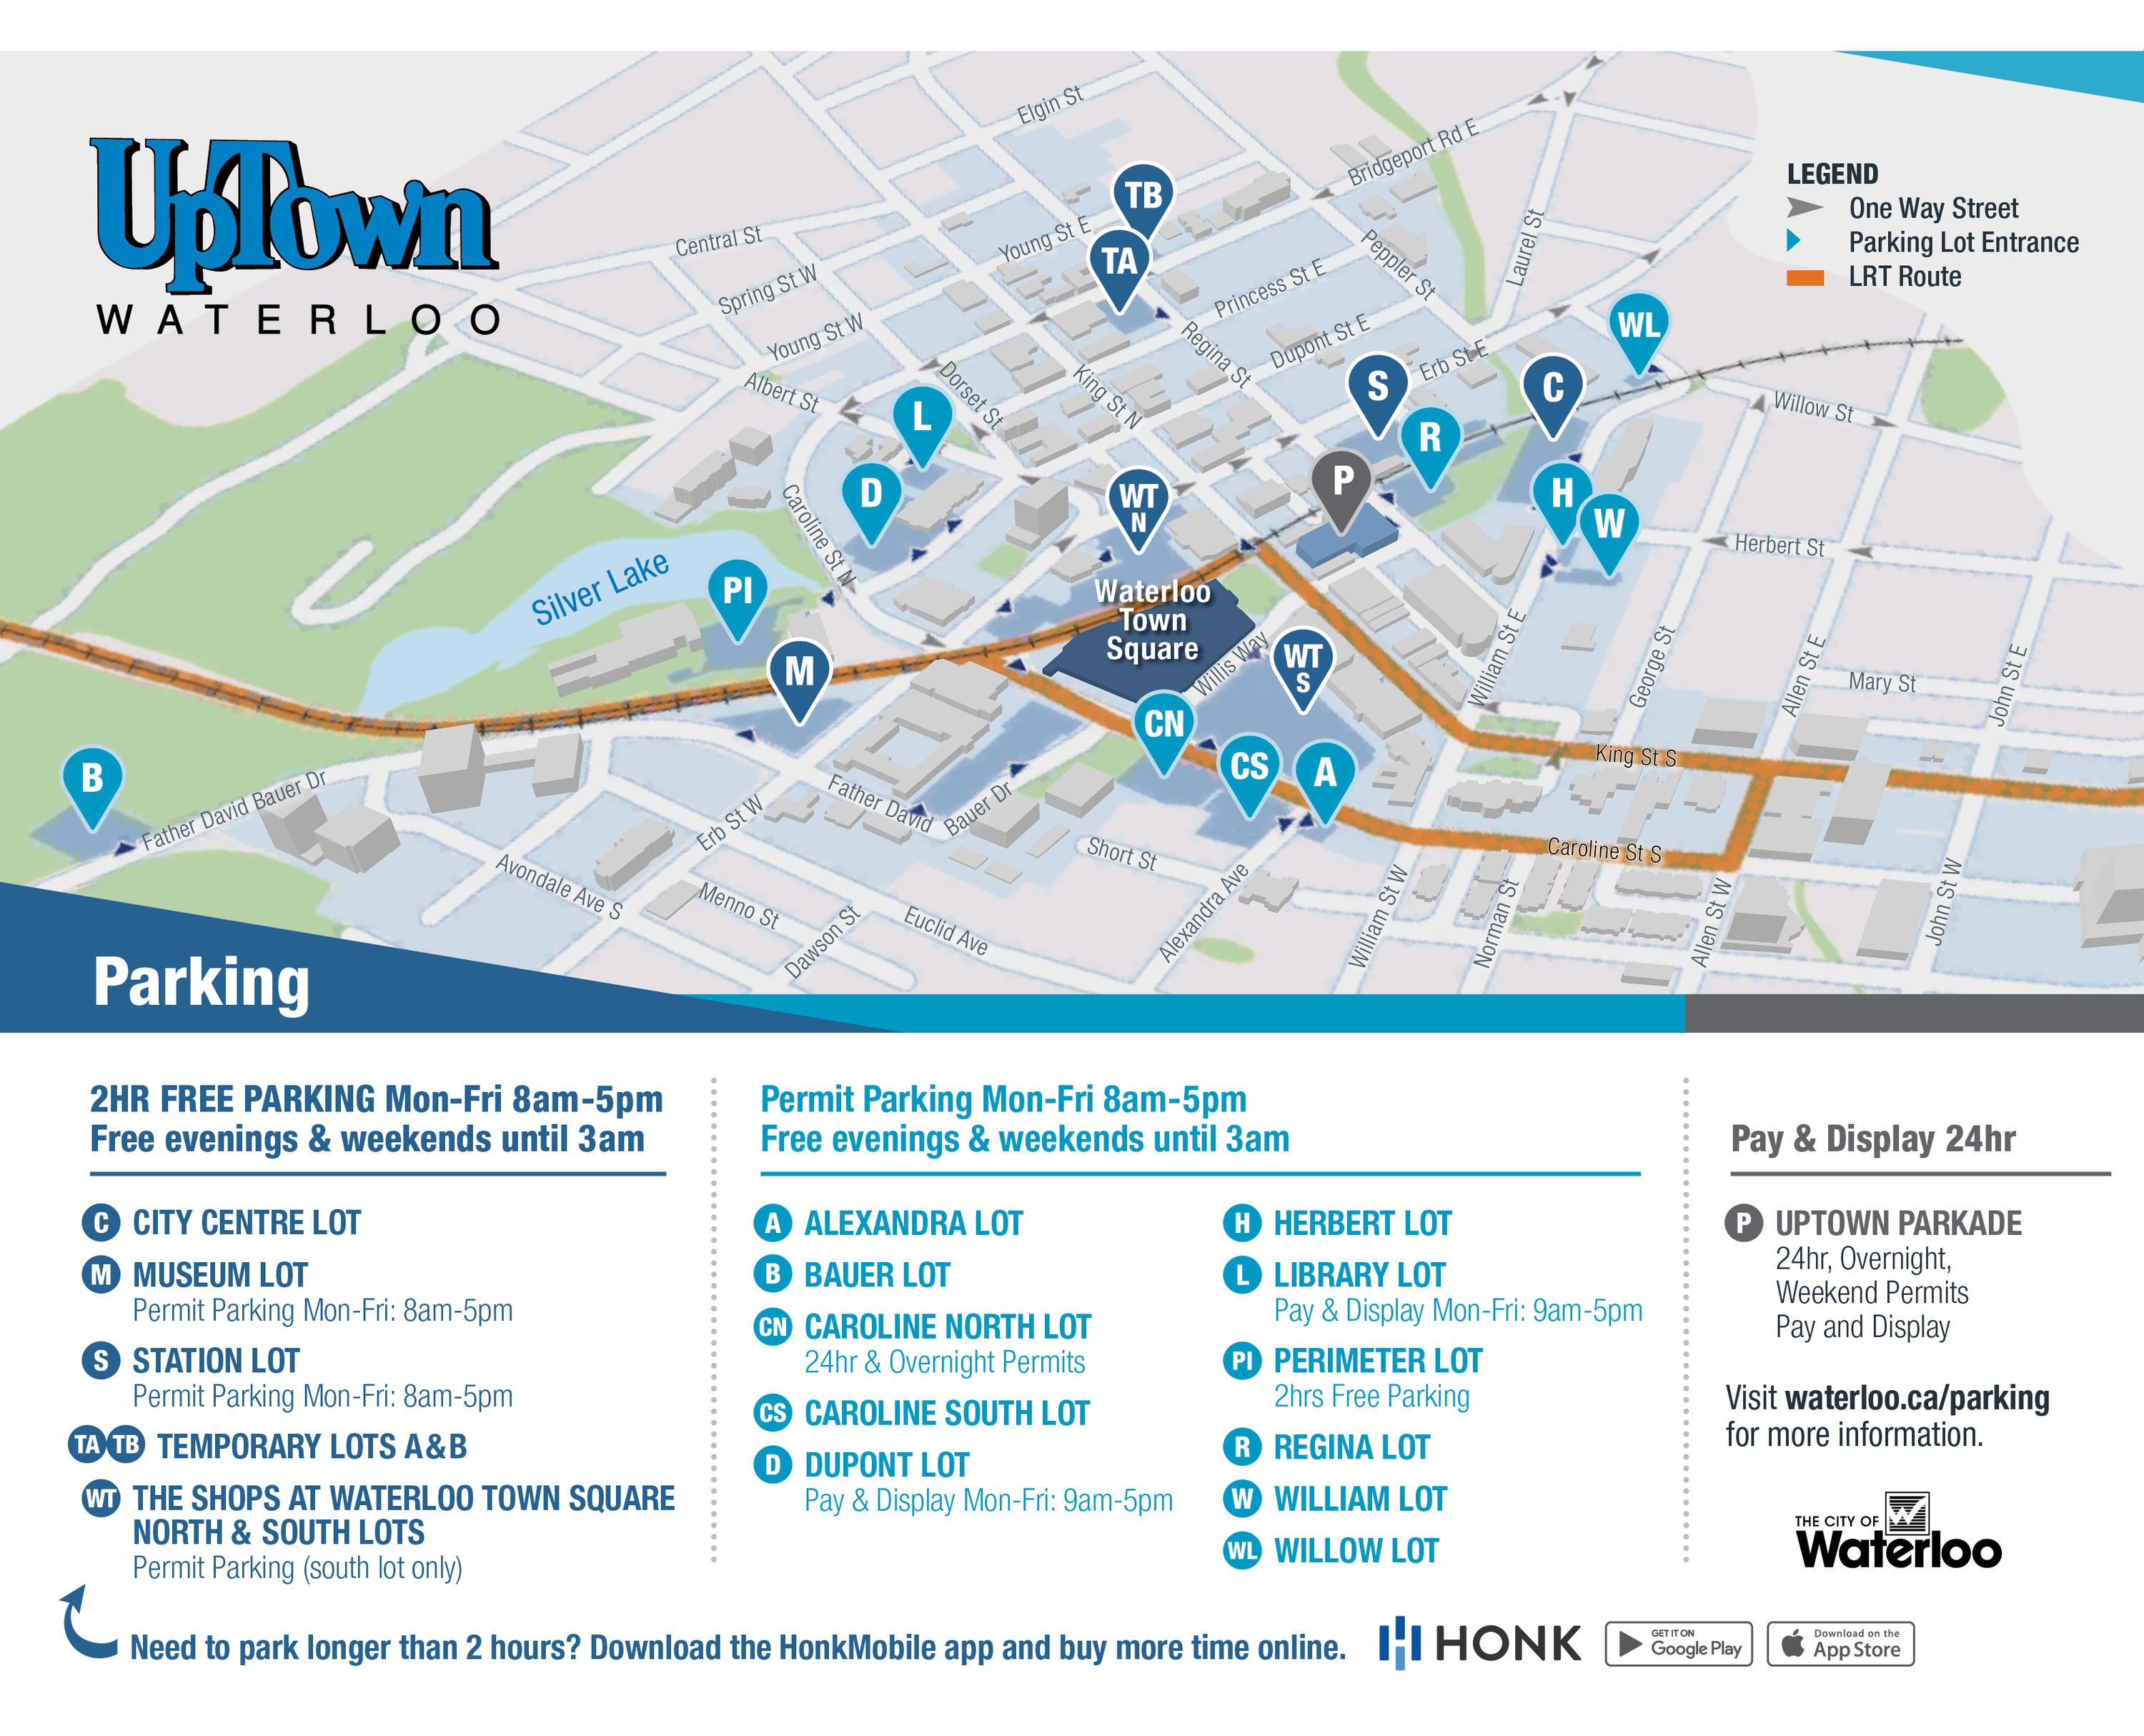 Map of parking in uptown Waterloo. Click on the image to read parking details.